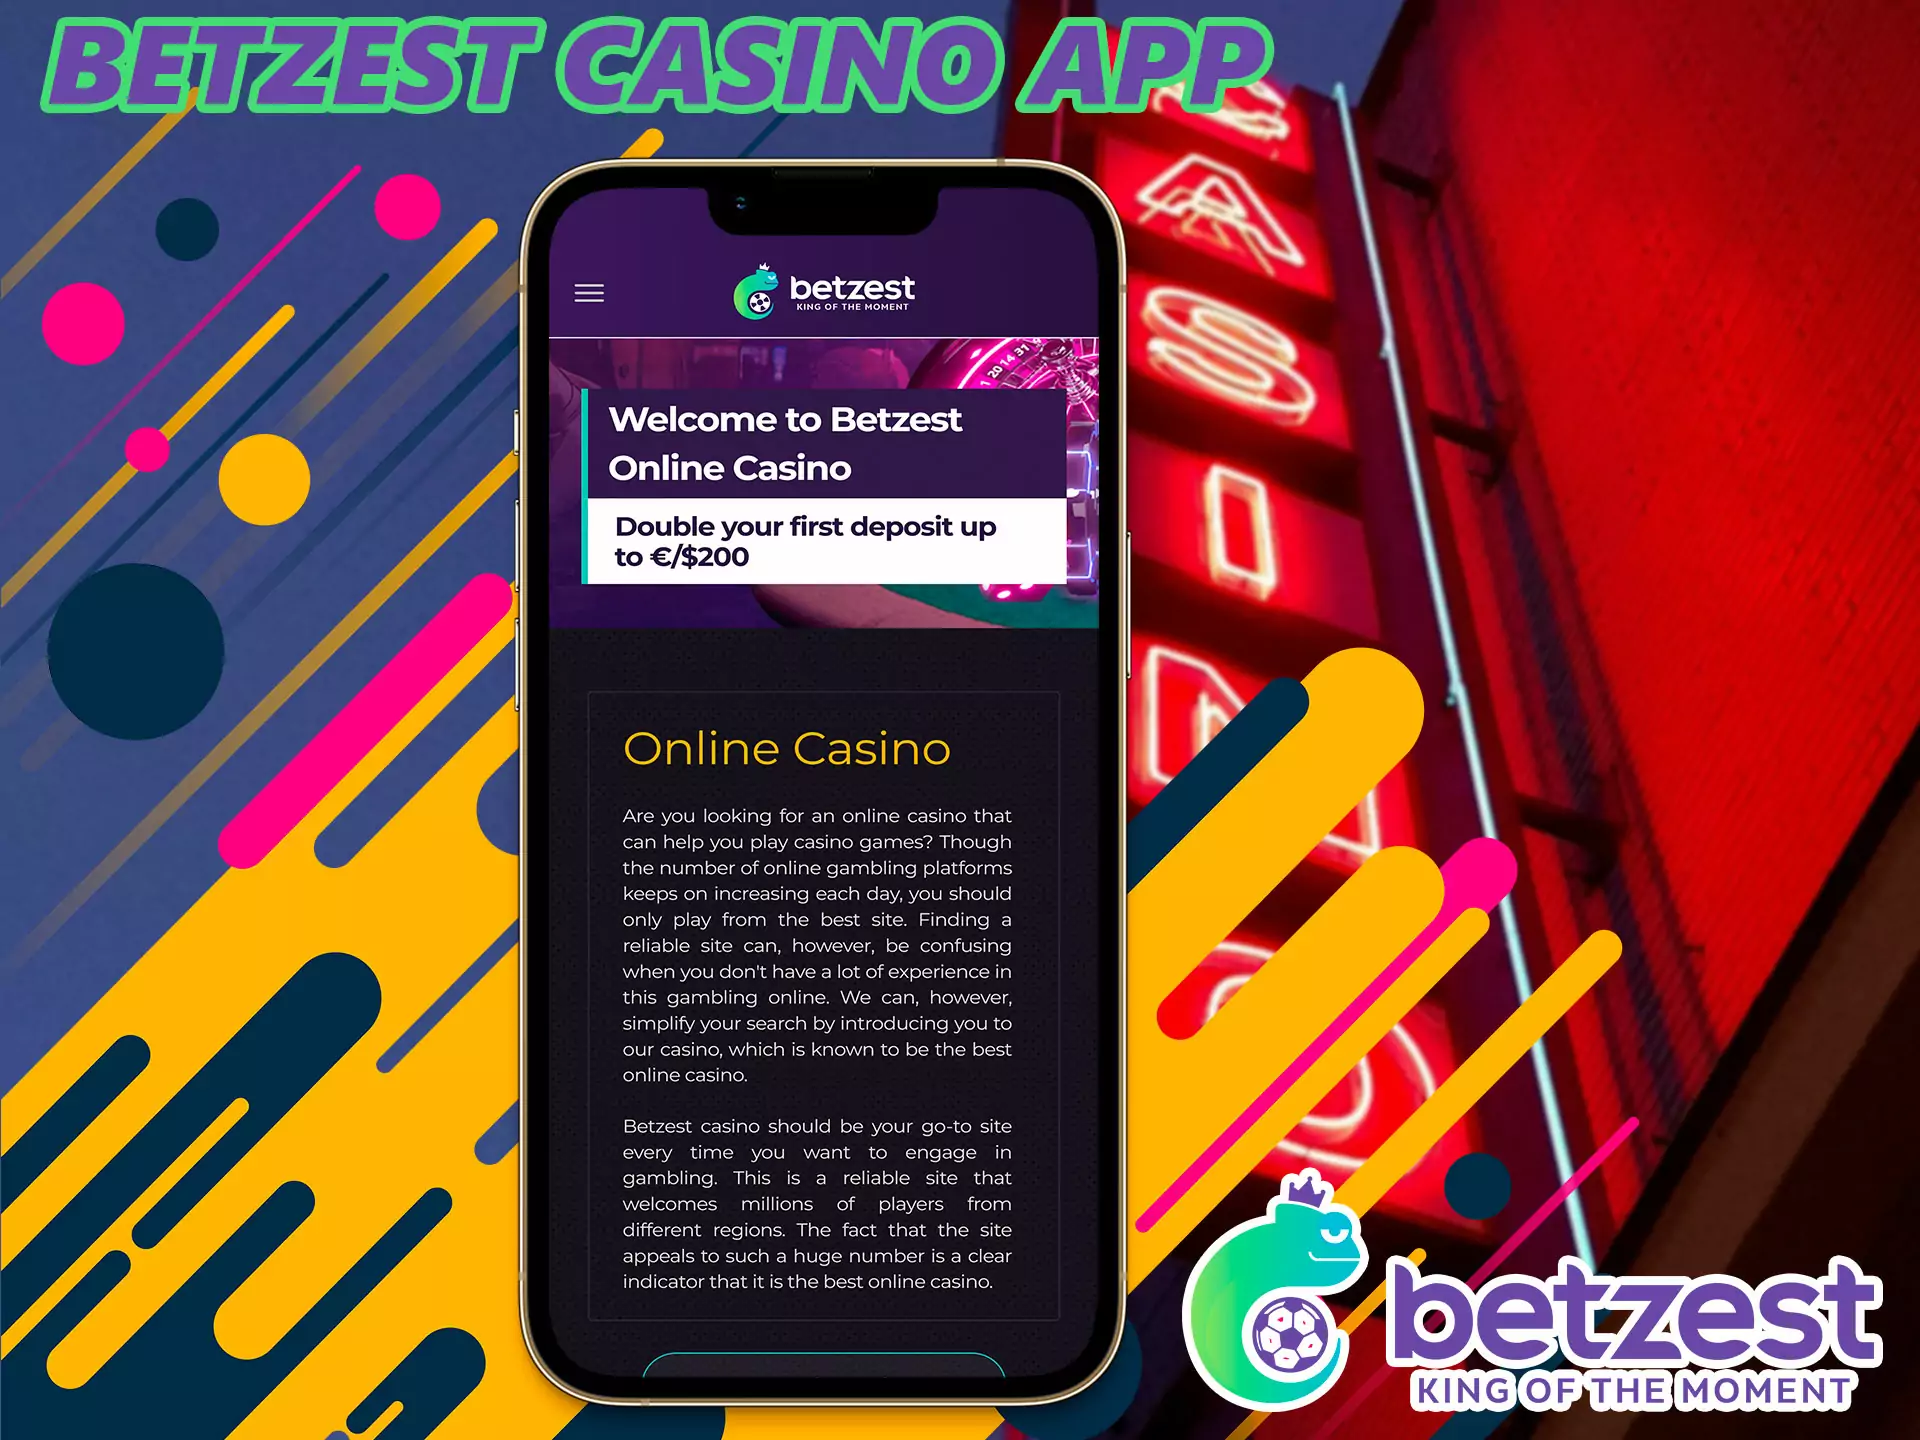 The next most important section to try is the section with gambling, you will find many different games, of which there are more than 400 on the platform.